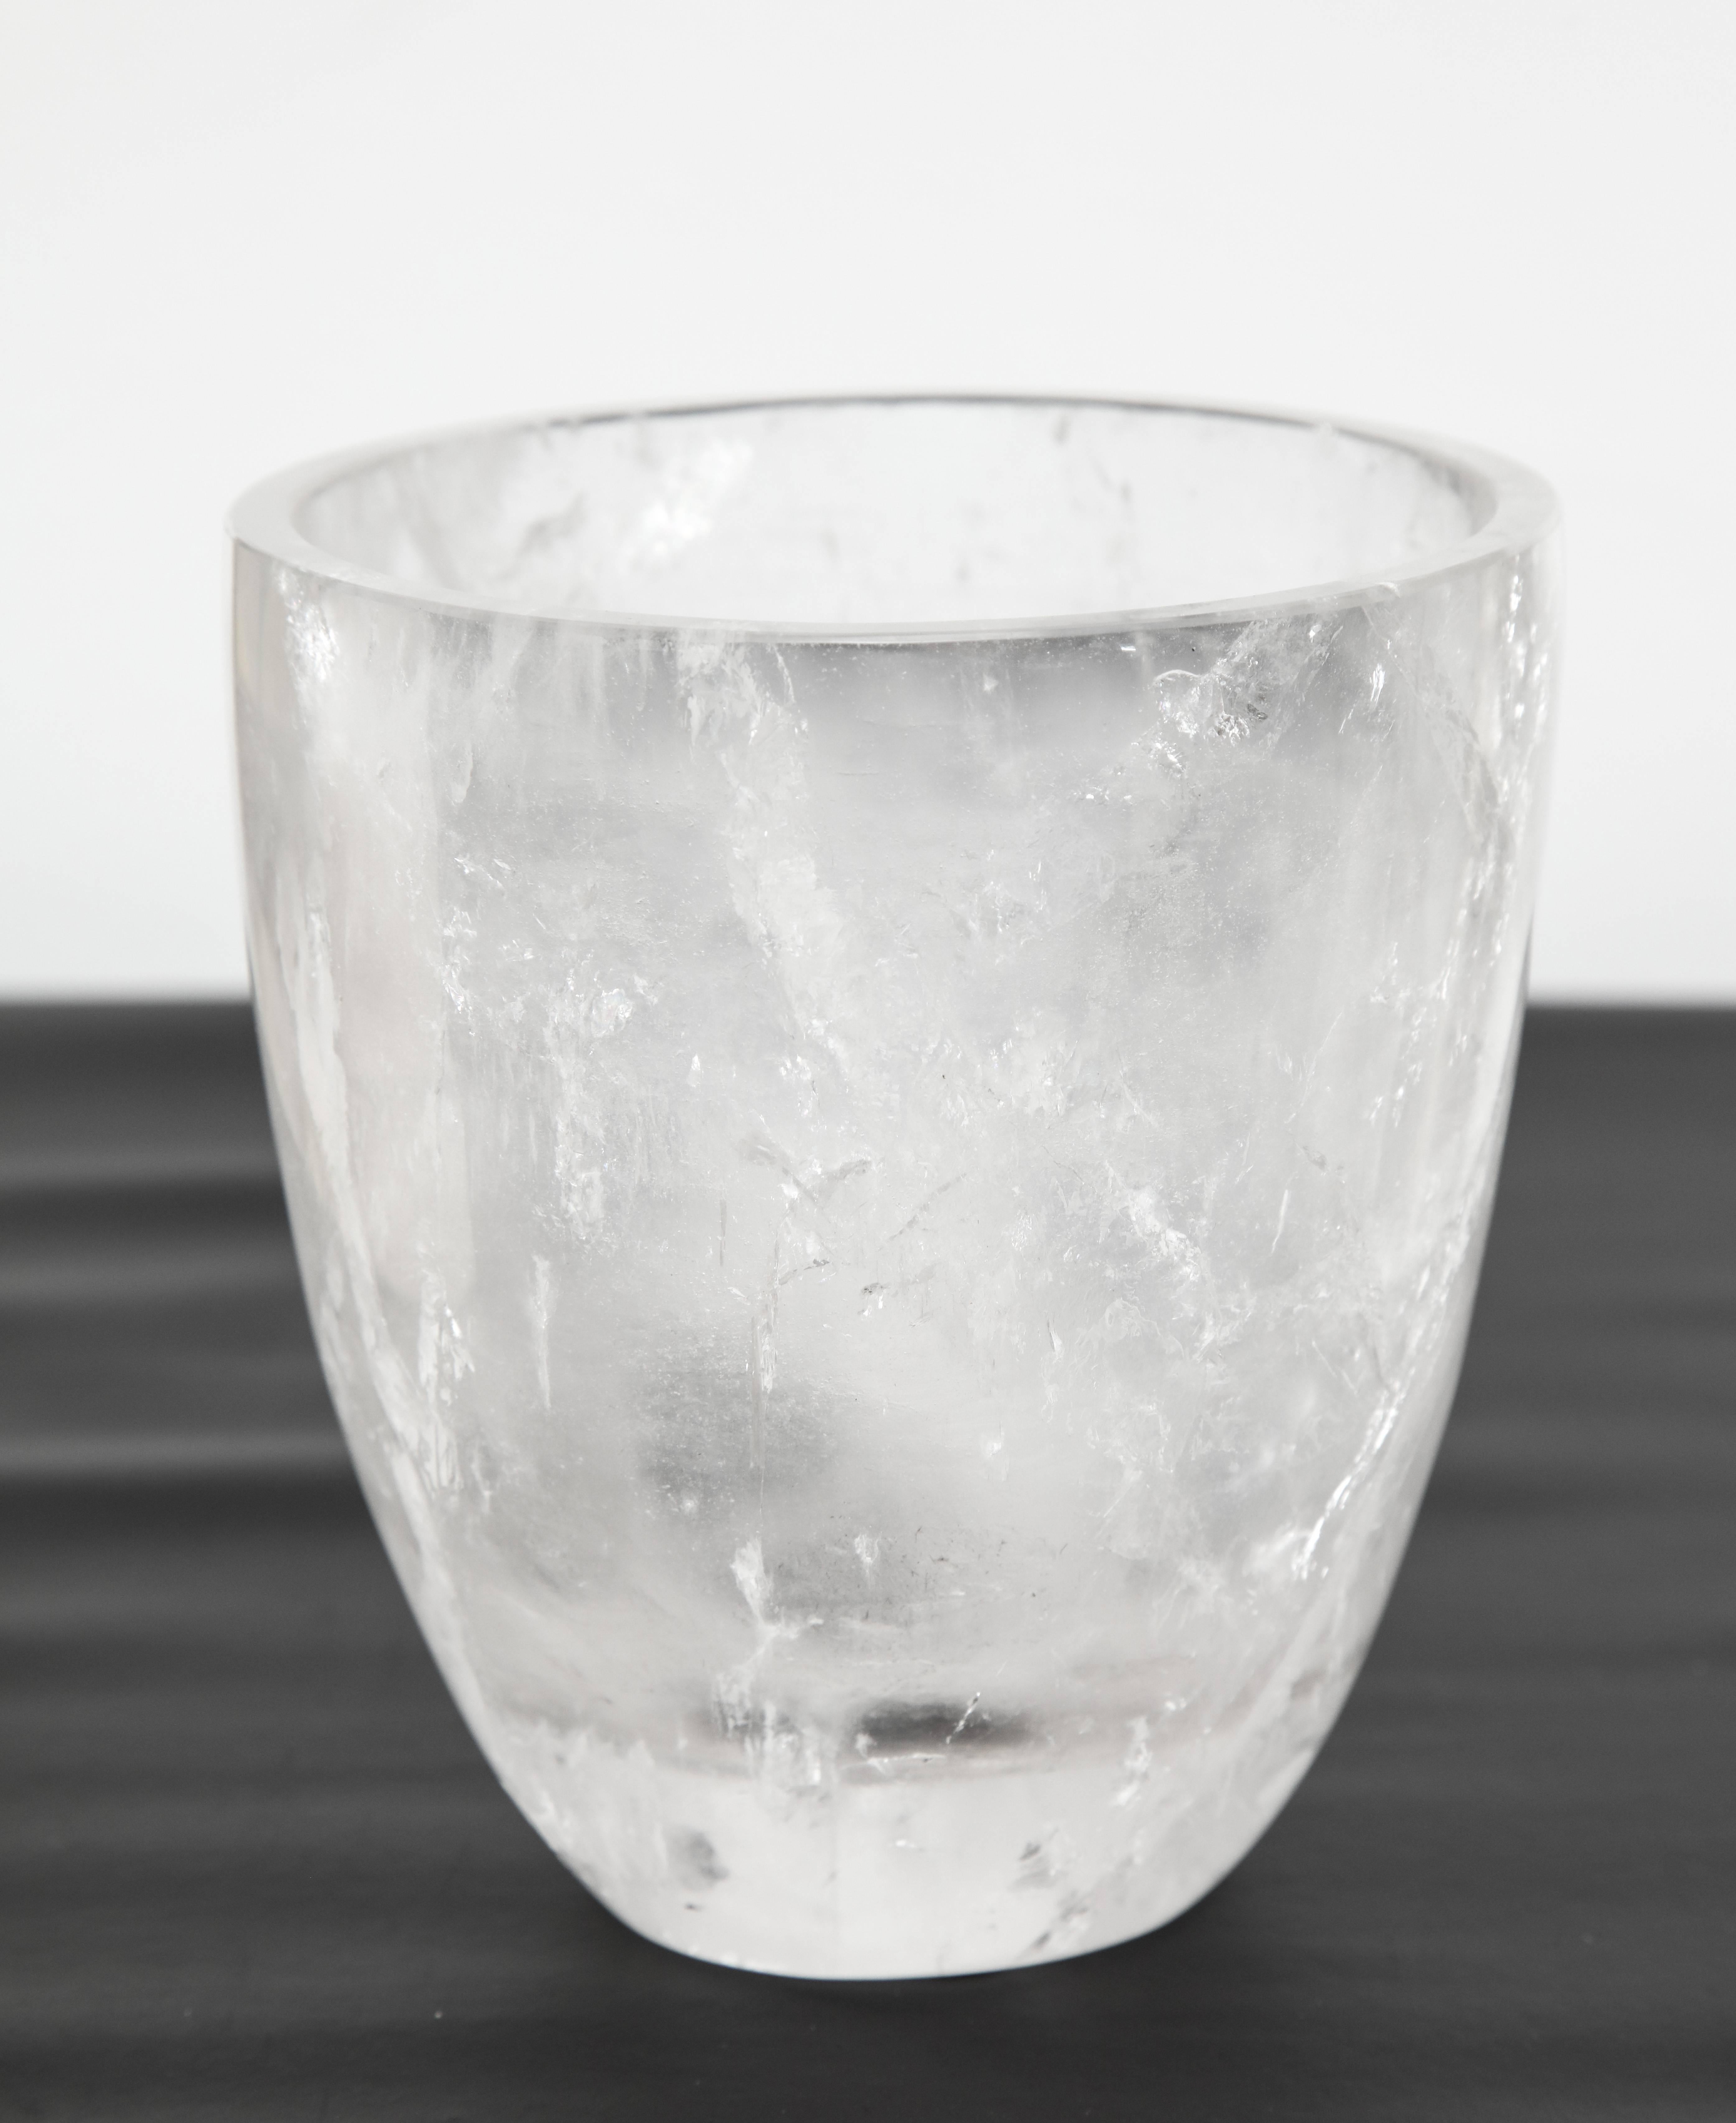 A sublime rock crystal vase with great natural frosted formations.